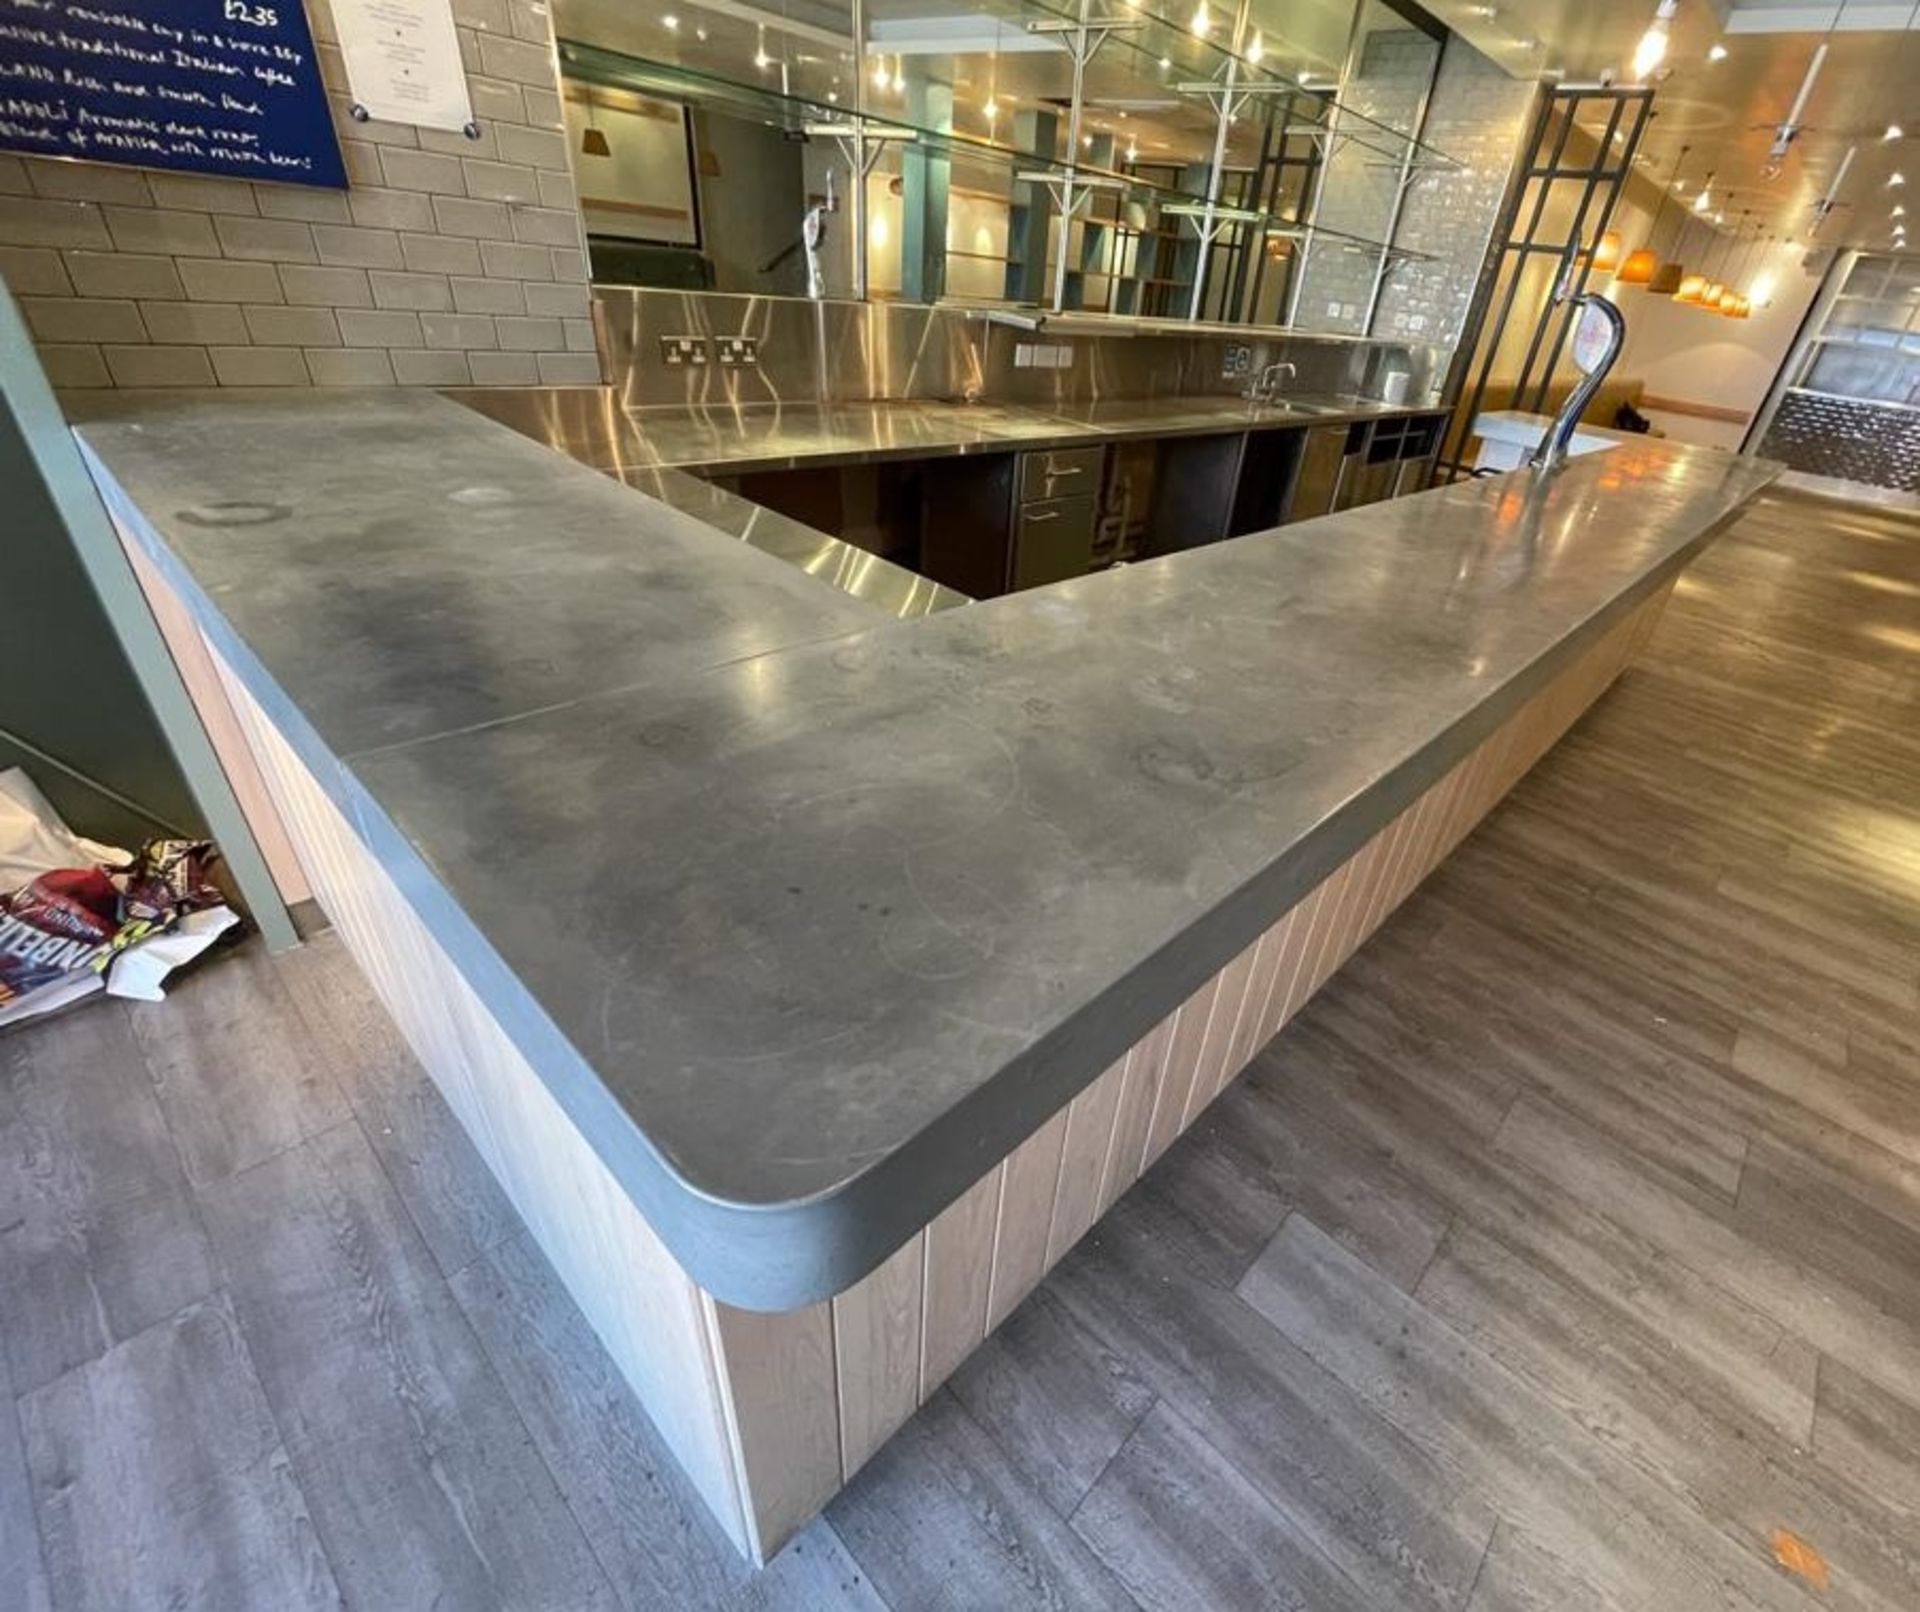 1 x Contemporary Restaurant Bar With Light Wood Panel Fascia, Sheet Metal Covered Bar Top, - Image 43 of 57